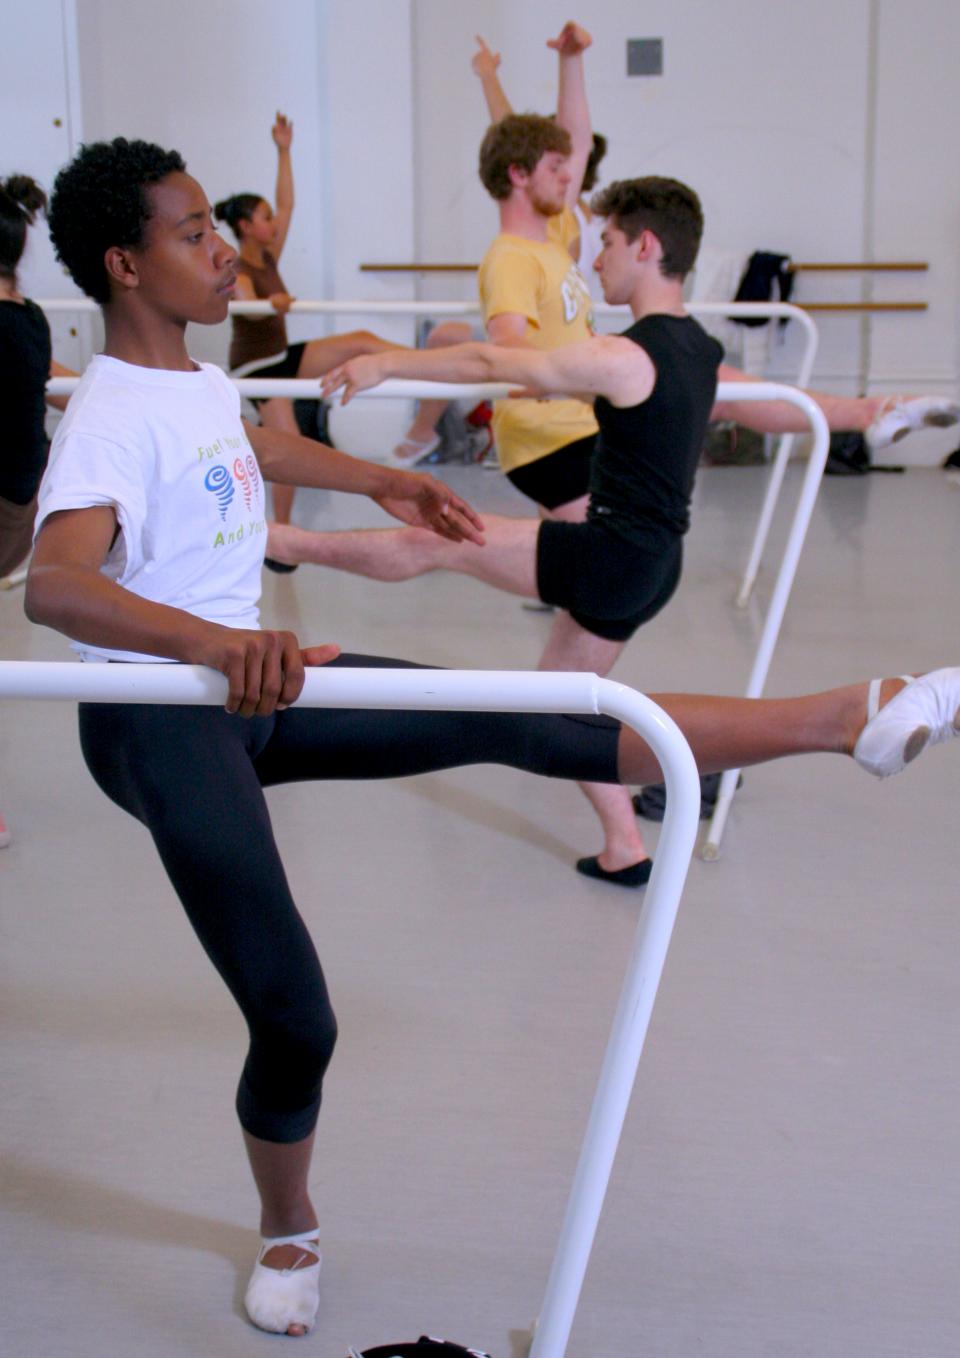 Young ballet dancers of different genders and ethnicities are performing stretches in a dance room. They are holding white bars, and their legs and arms are extended. They wear white ballet shoes.